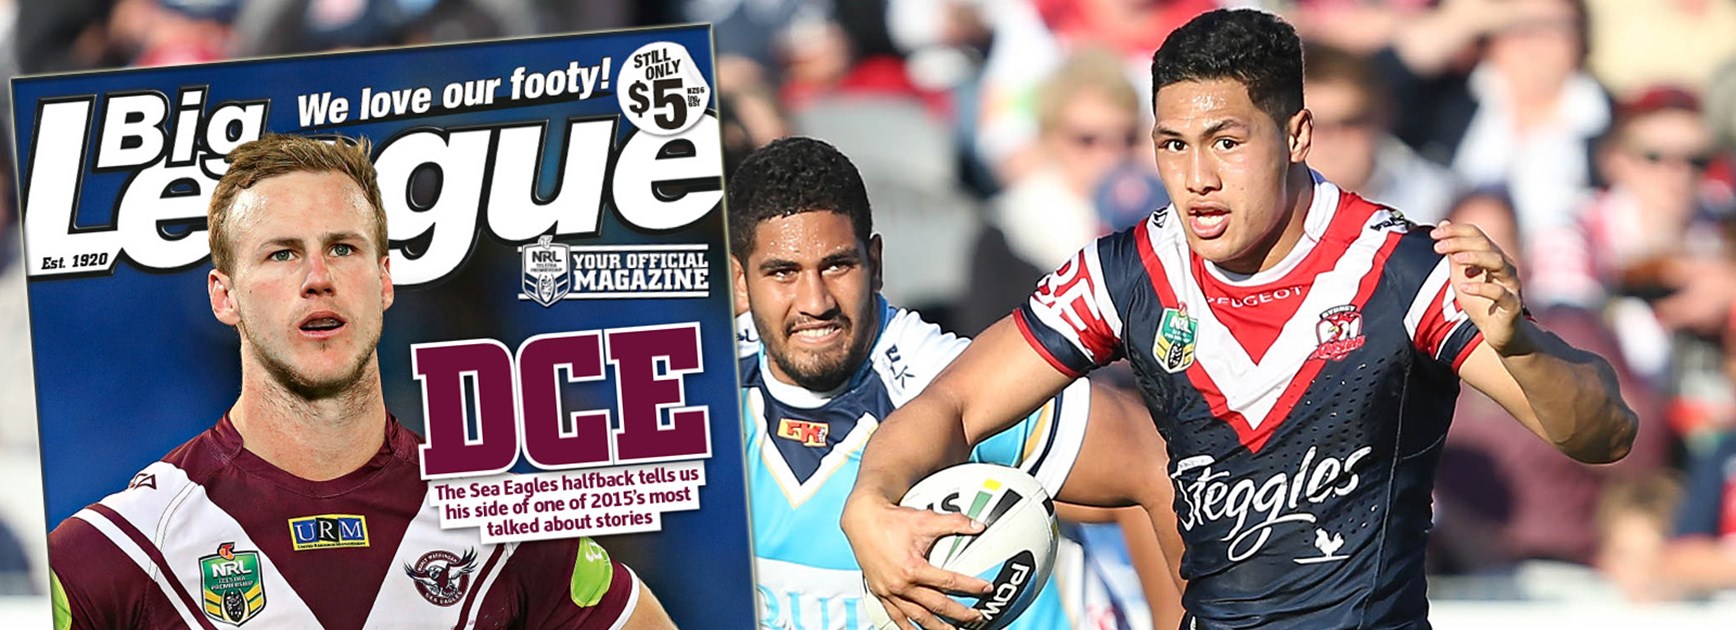 Roger Tuivasa-Sheck's running game is now even more important to the success of the Roosters.